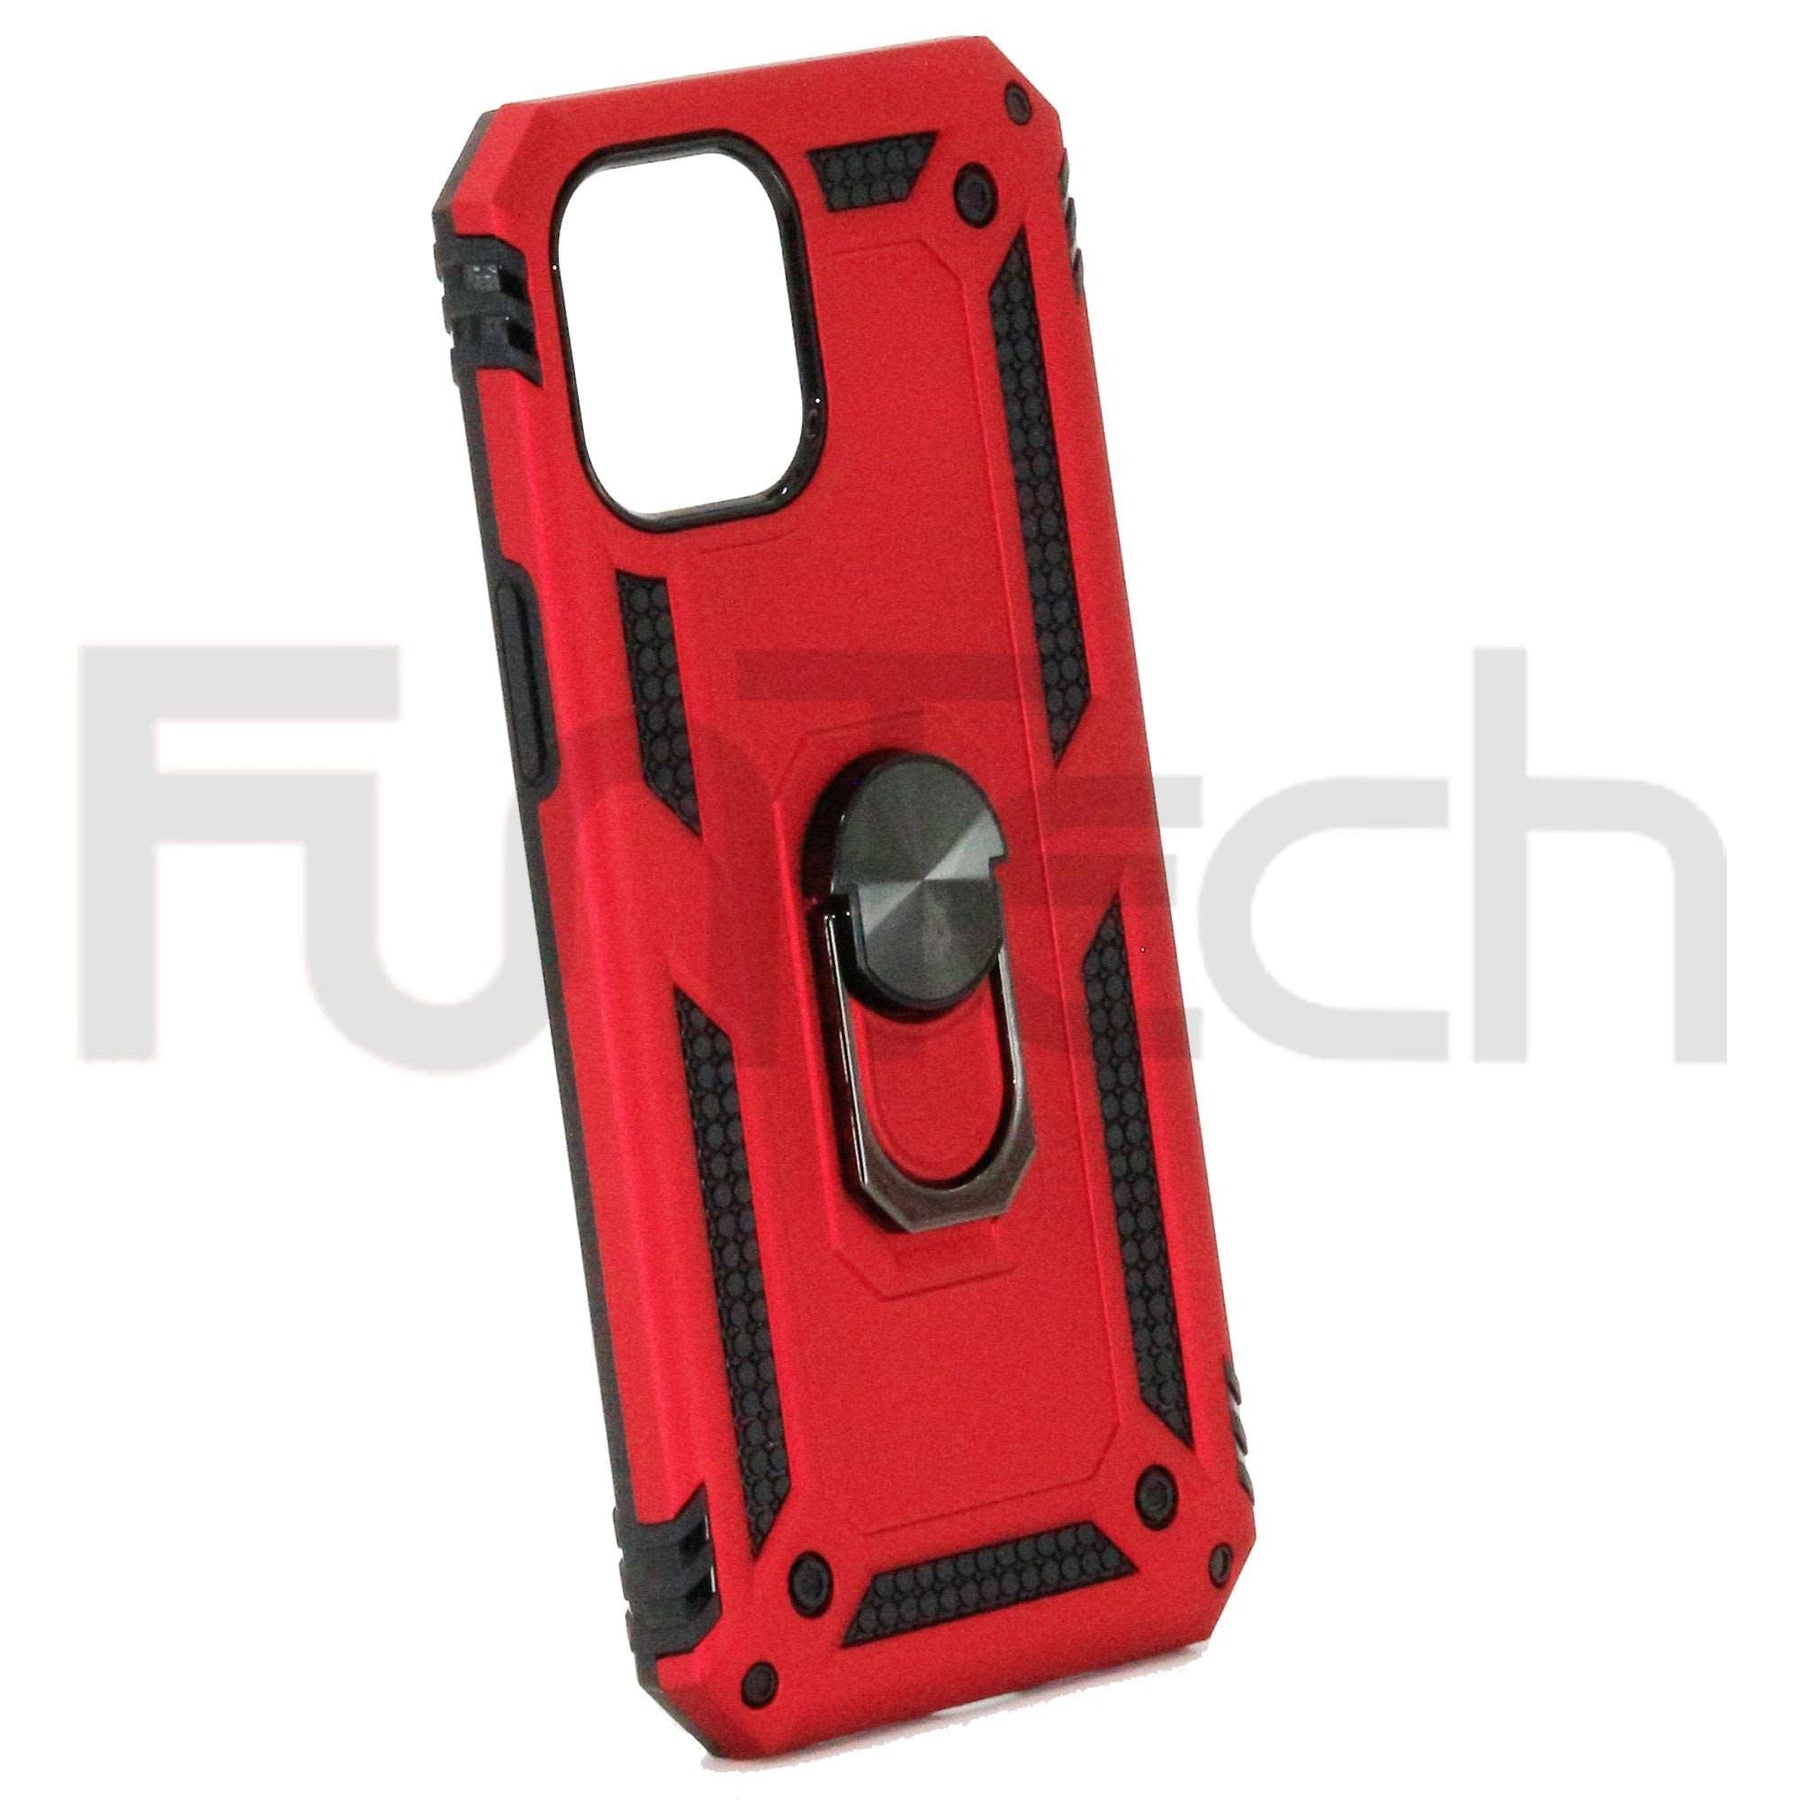 Apple iPhone 12 Pro Max Ring Armor Case Red